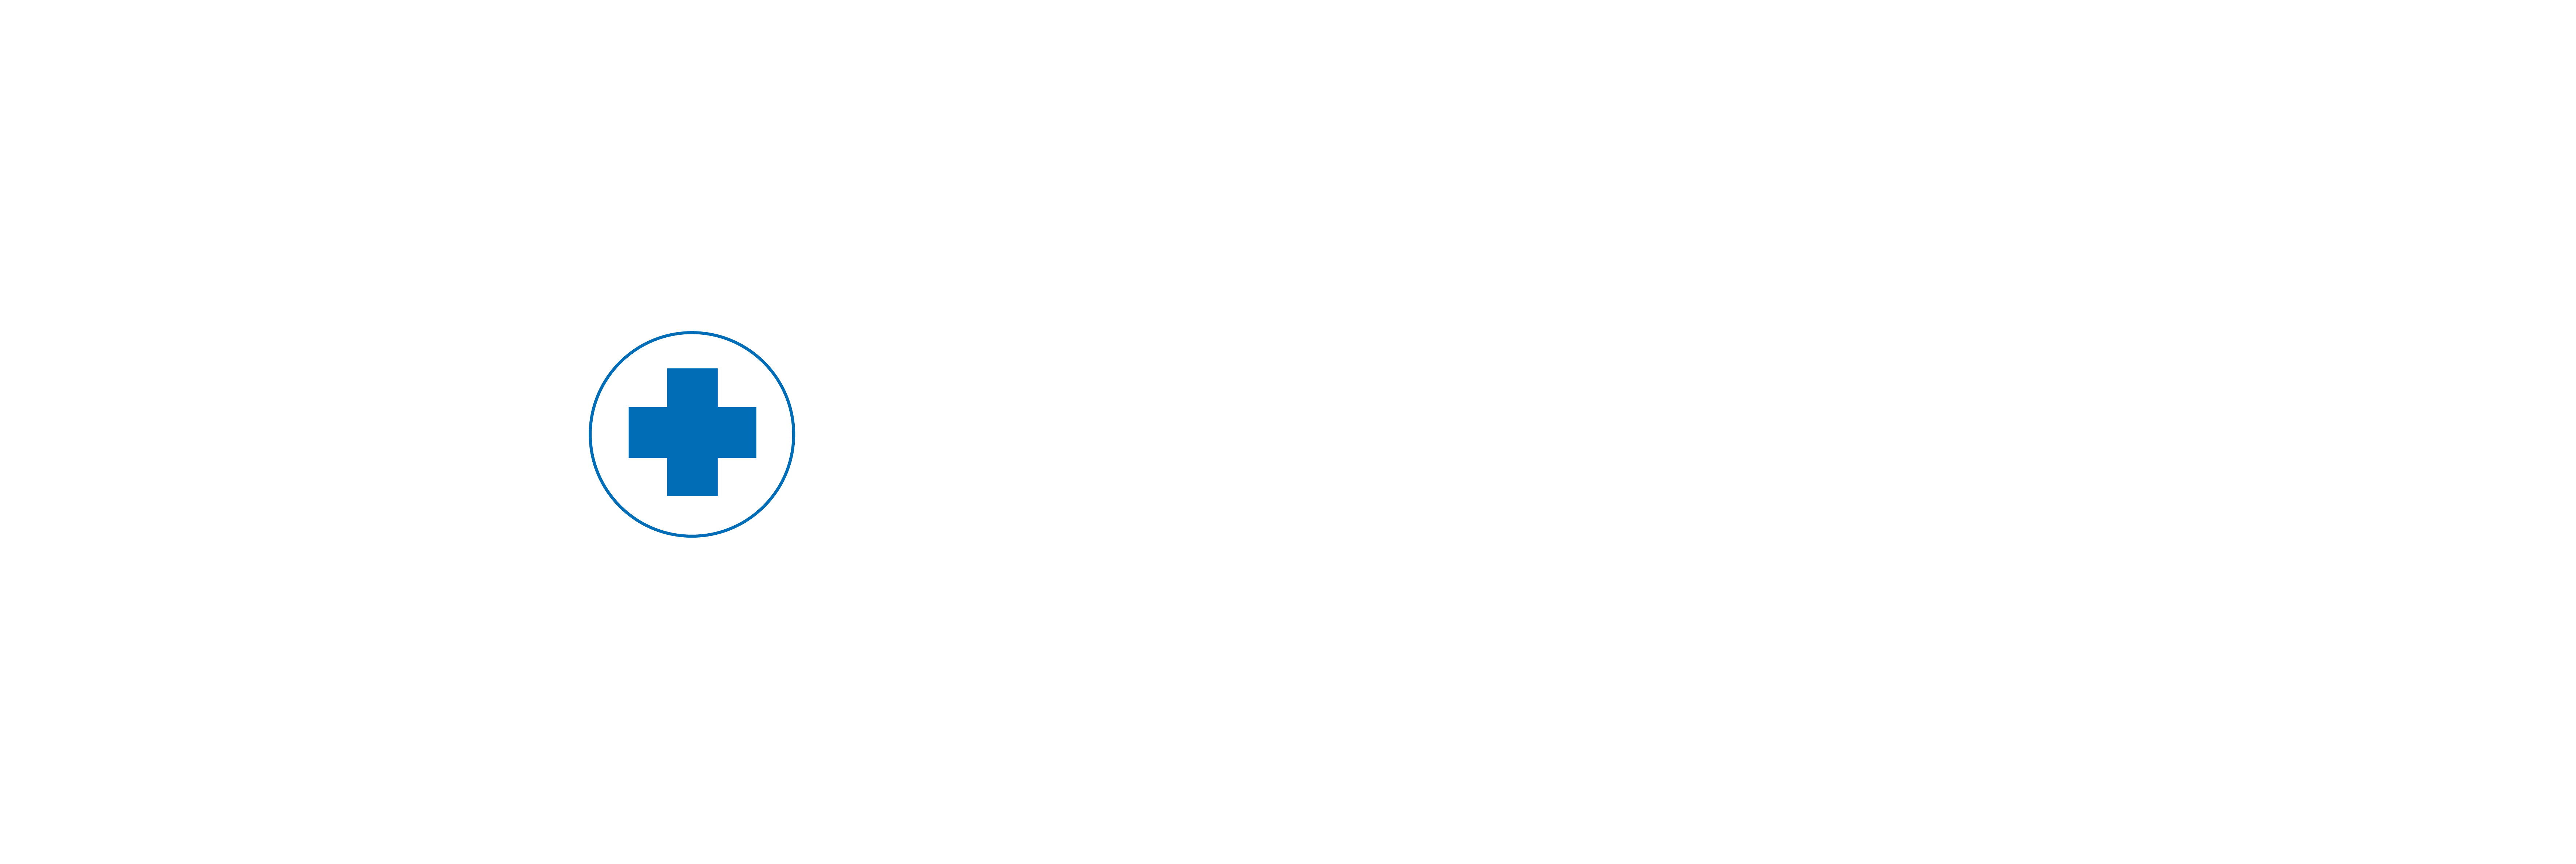 Greater Manchester Urgent Primary care Alliance